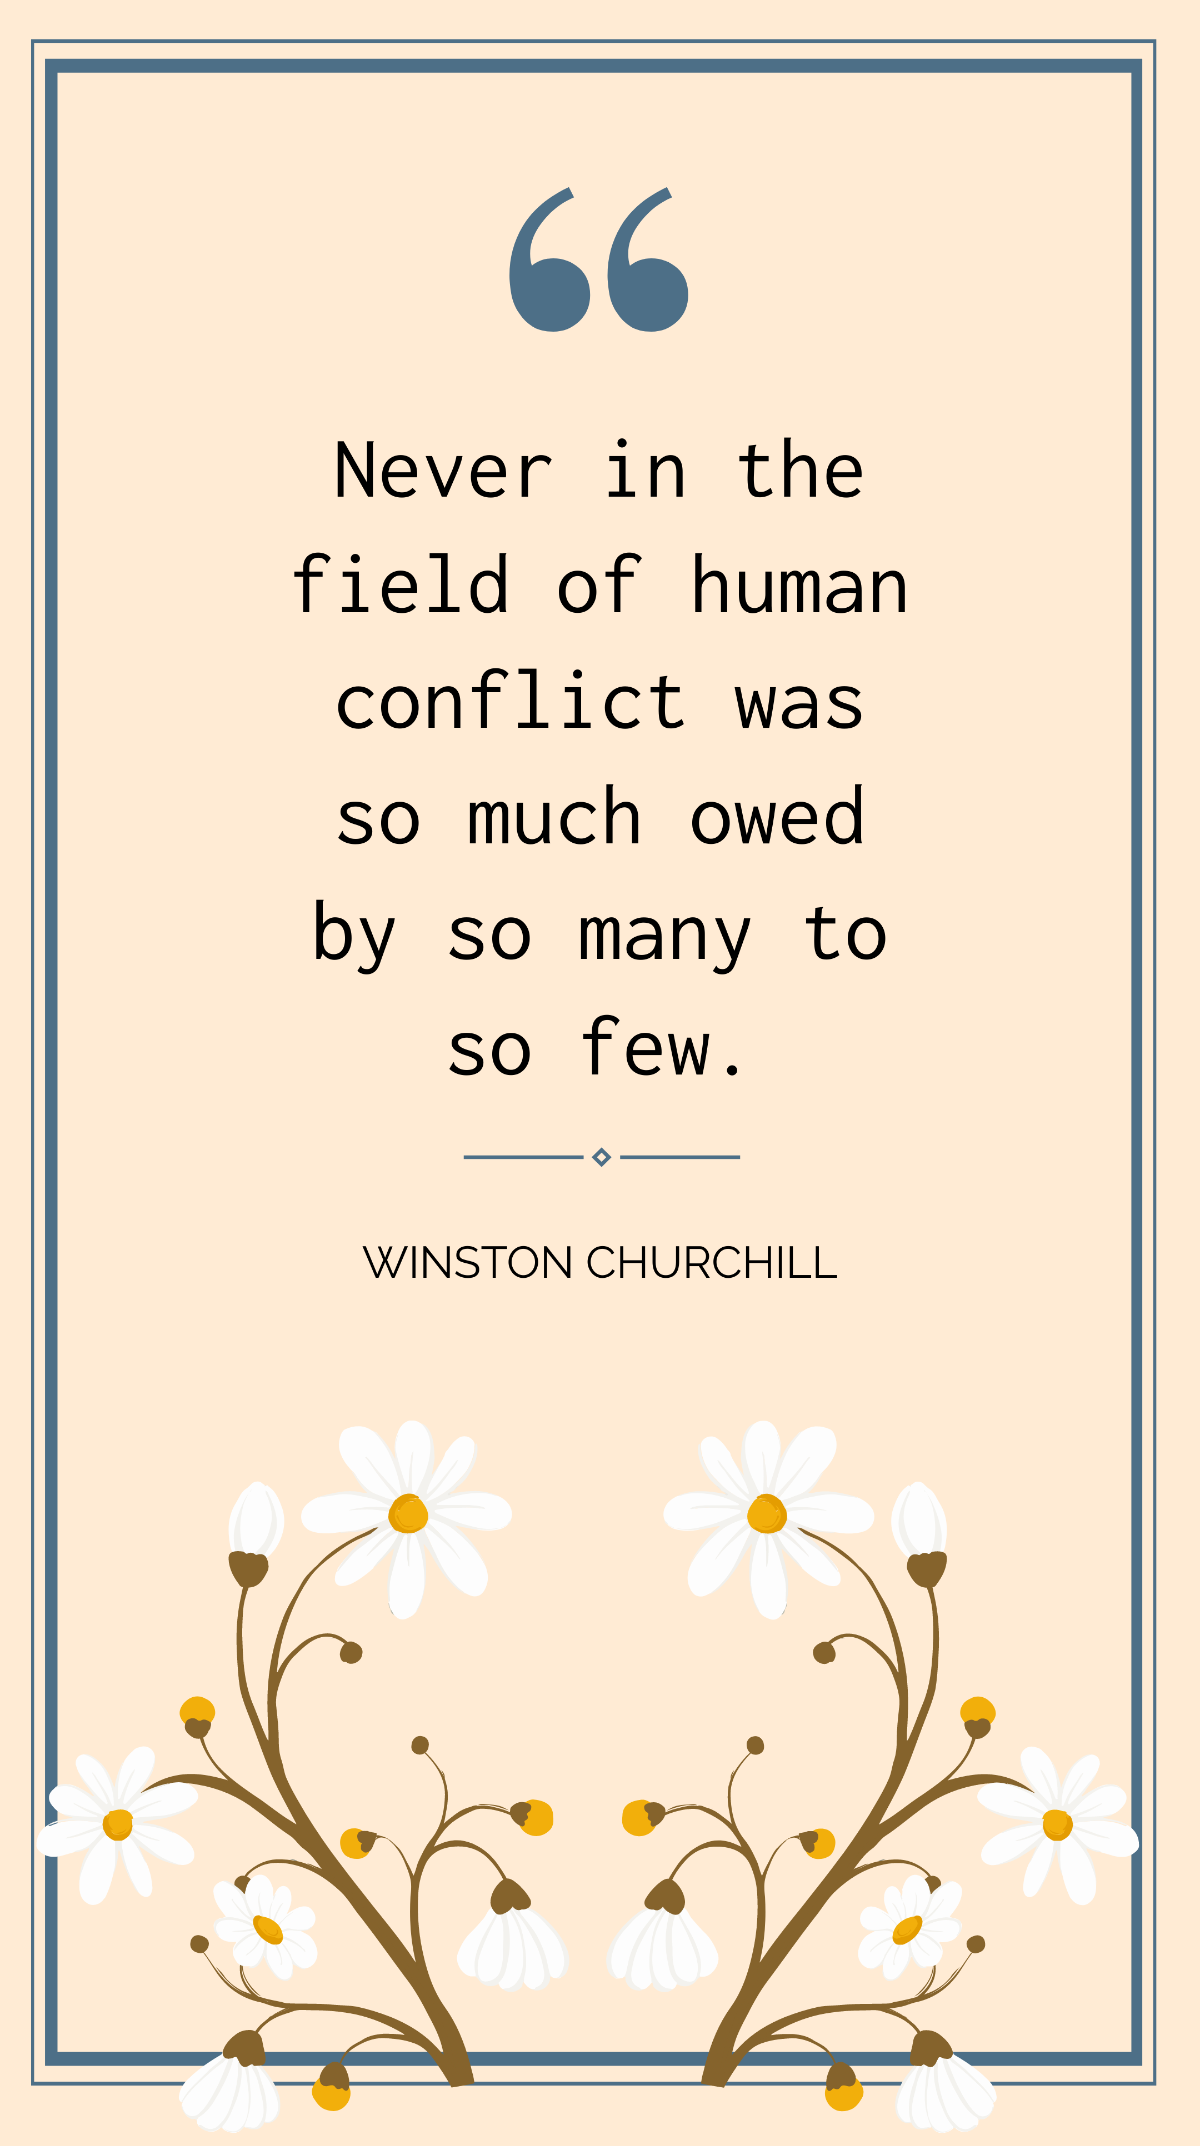 Winston Churchill - Never in the field of human conflict was so much owed by so many to so few  Template